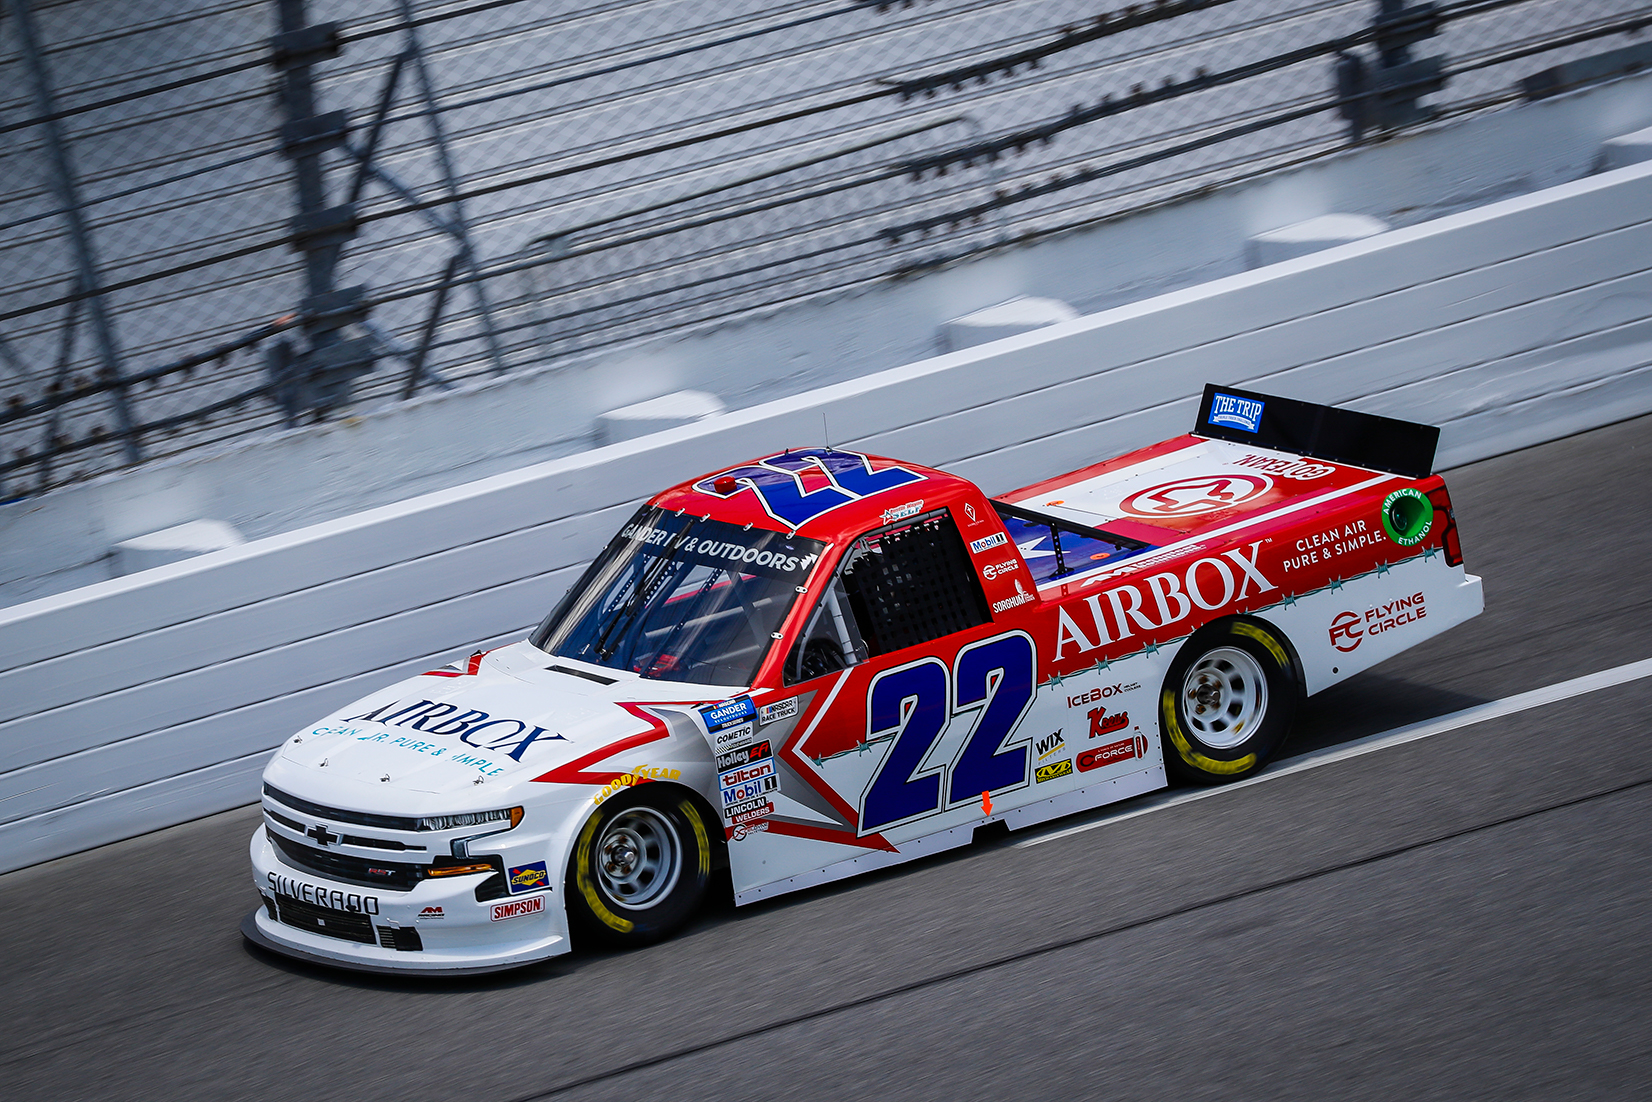 Austin Wayne Self, driver of the AM Racing #22 of the NASCAR Gander Outdoor Truck Series, navigates through the 'dirty air' at Daytona International Speedway's road course race in August 2020.
Photo Credential: Daylon Barr